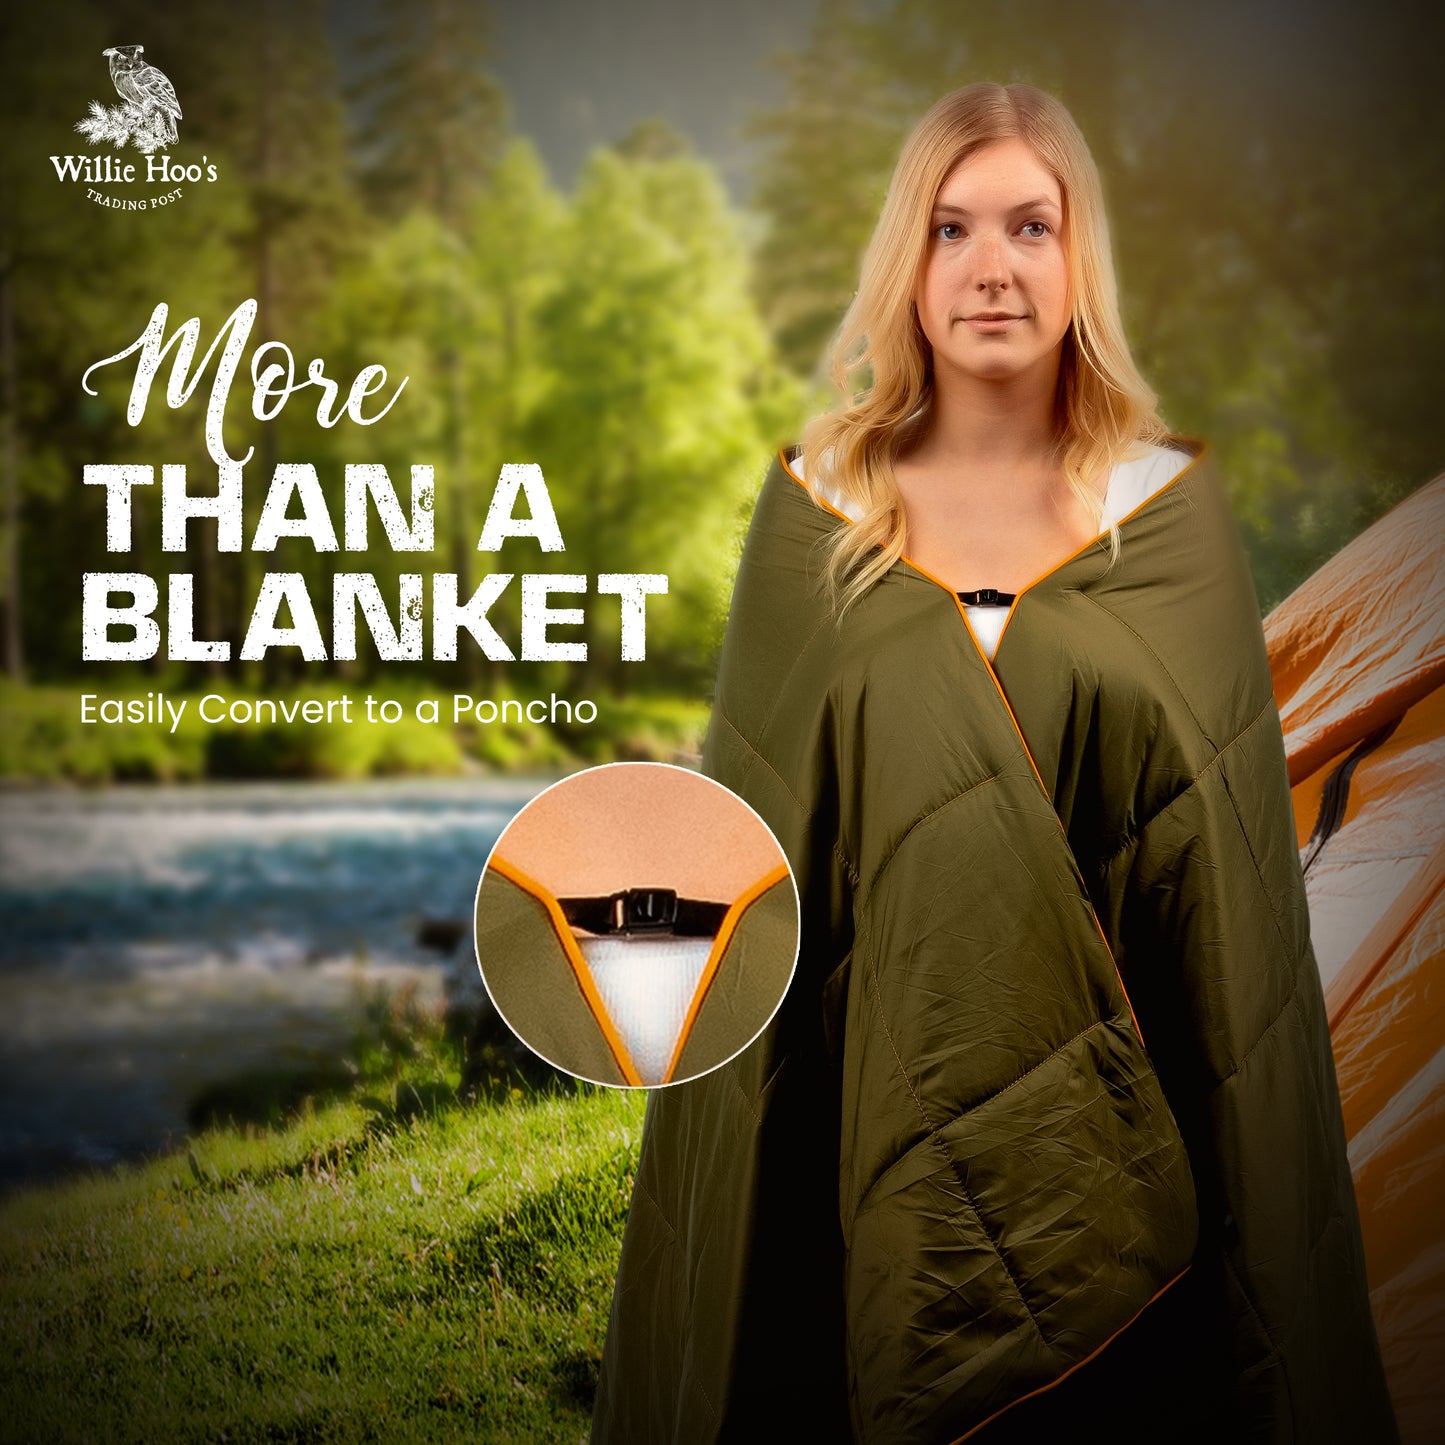 Camping Blanket - Willie Hoo's Trading Post